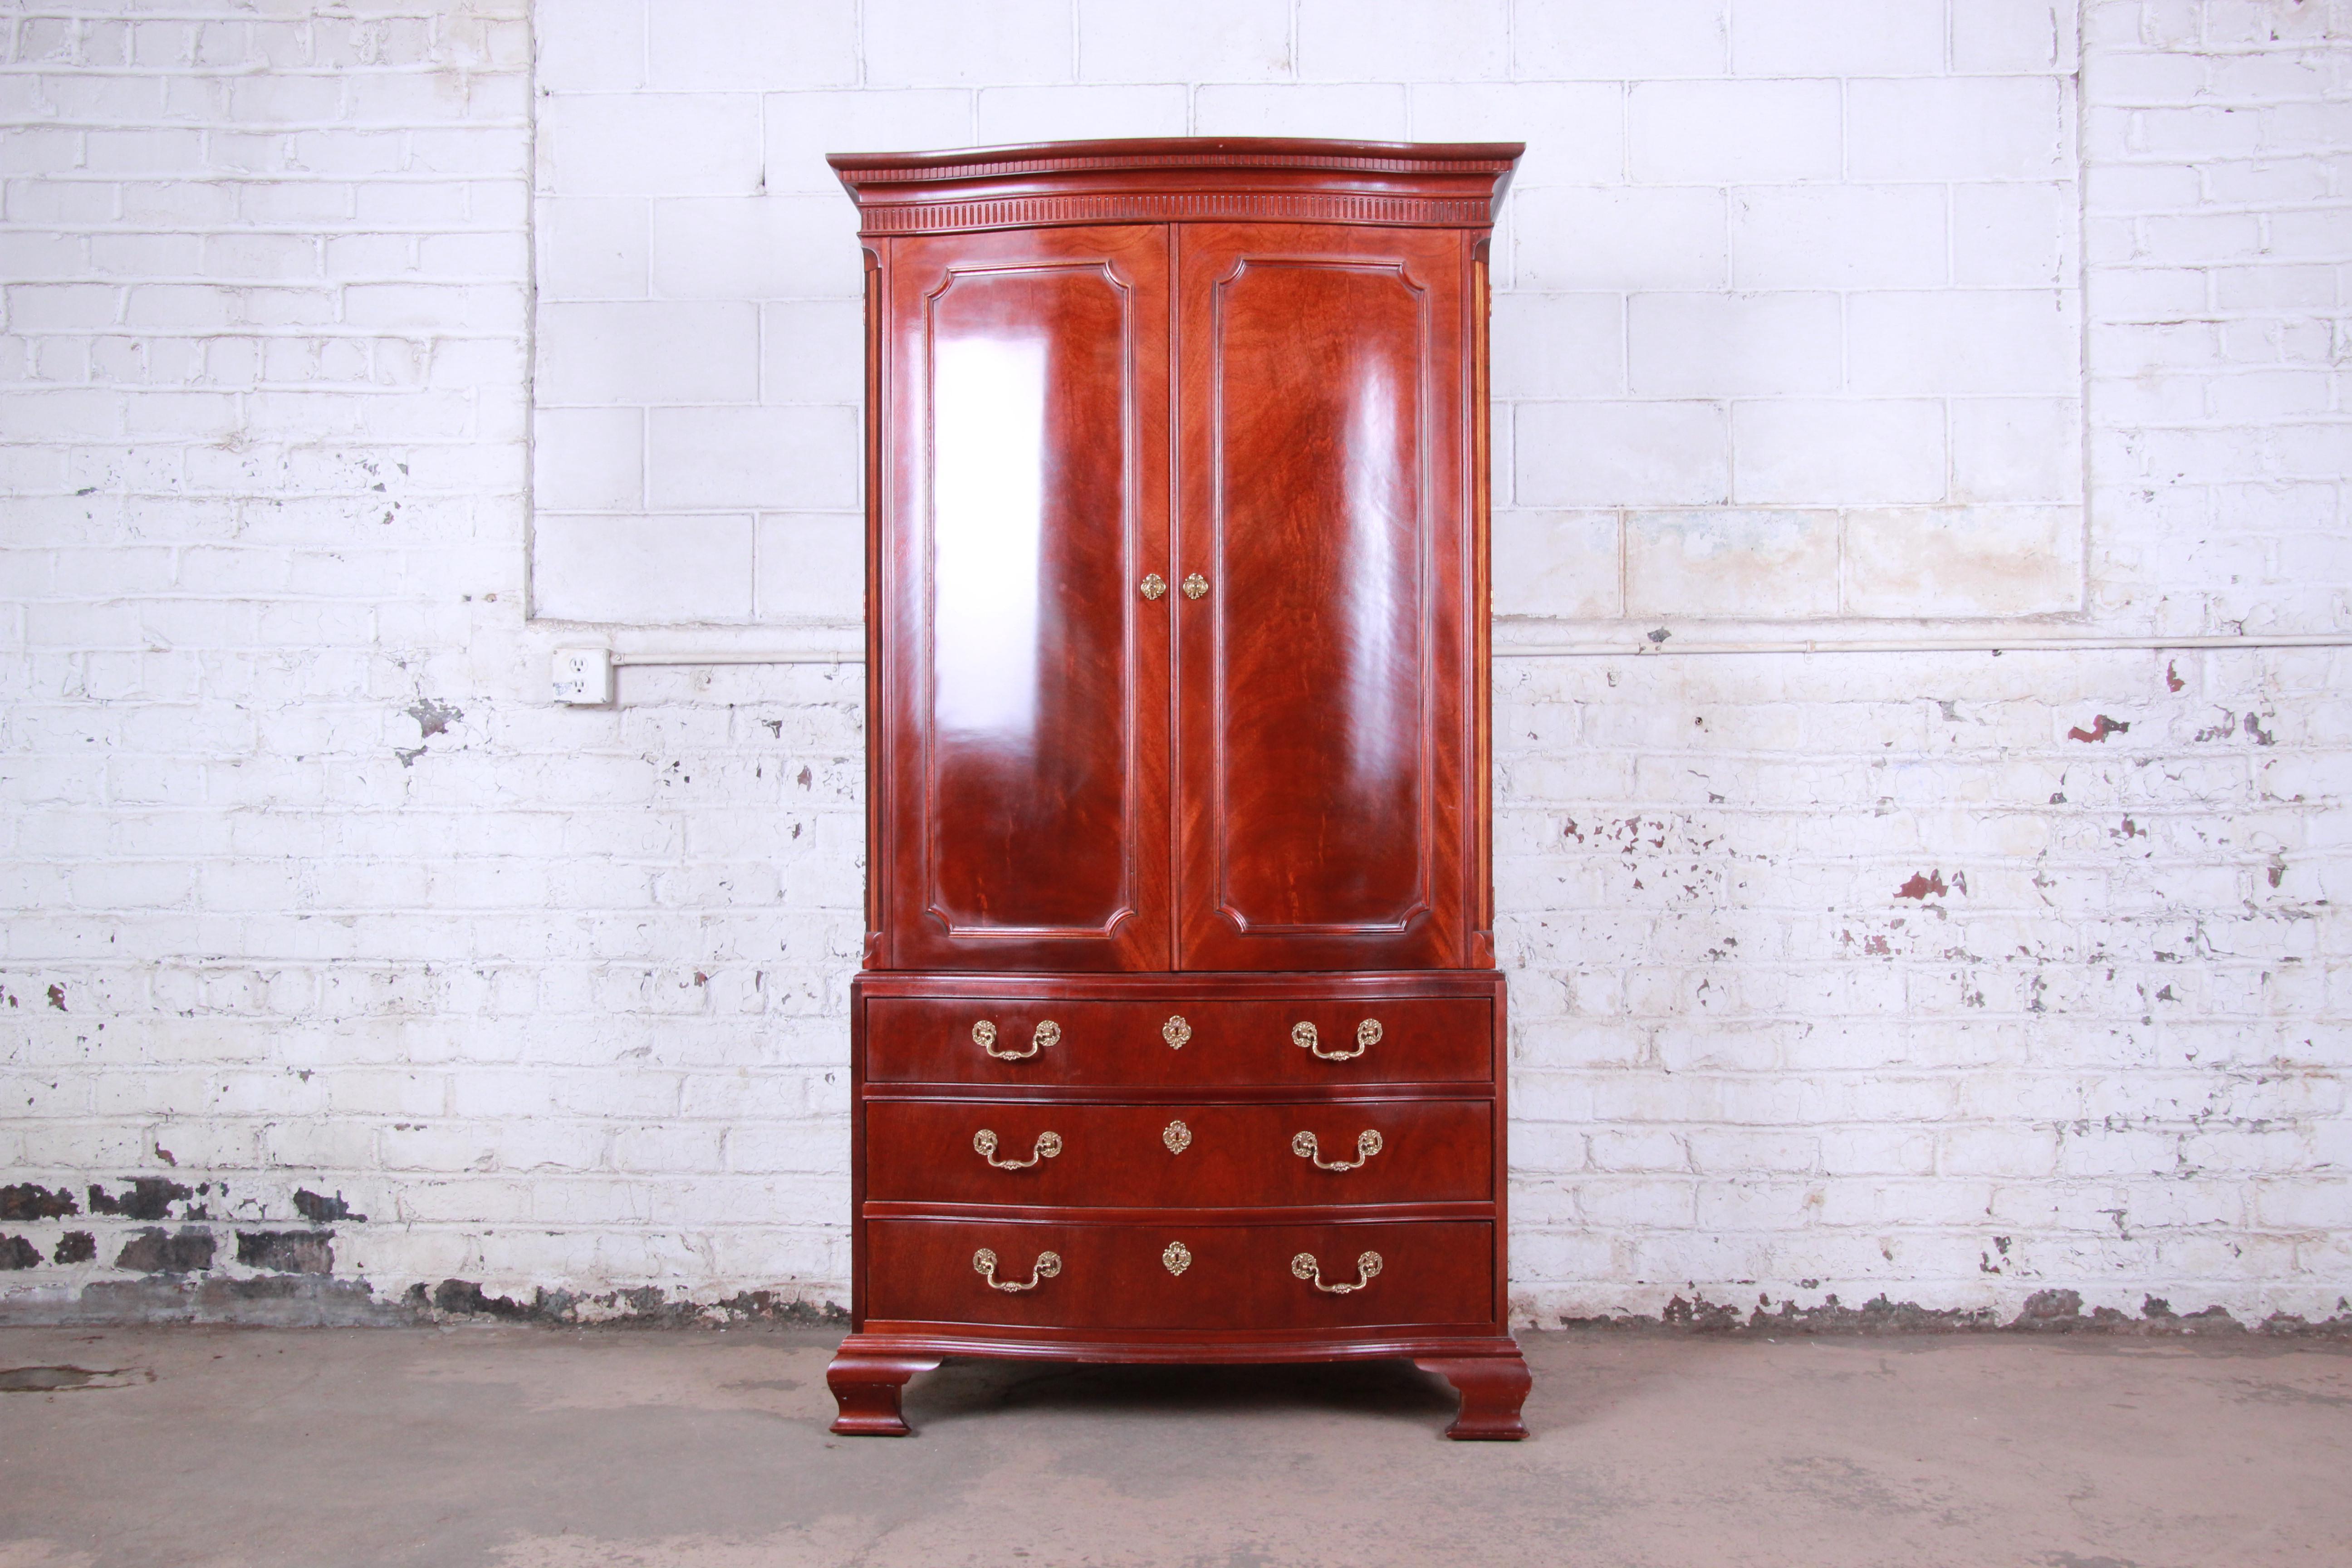 An exceptional Georgian style mahogany wardrobe or linen press by Baker Furniture. The chest features gorgeous mahogany wood grain with nice carved wood and inlaid details. It offers excellent storage, with three cubbies and two adjustable shelves